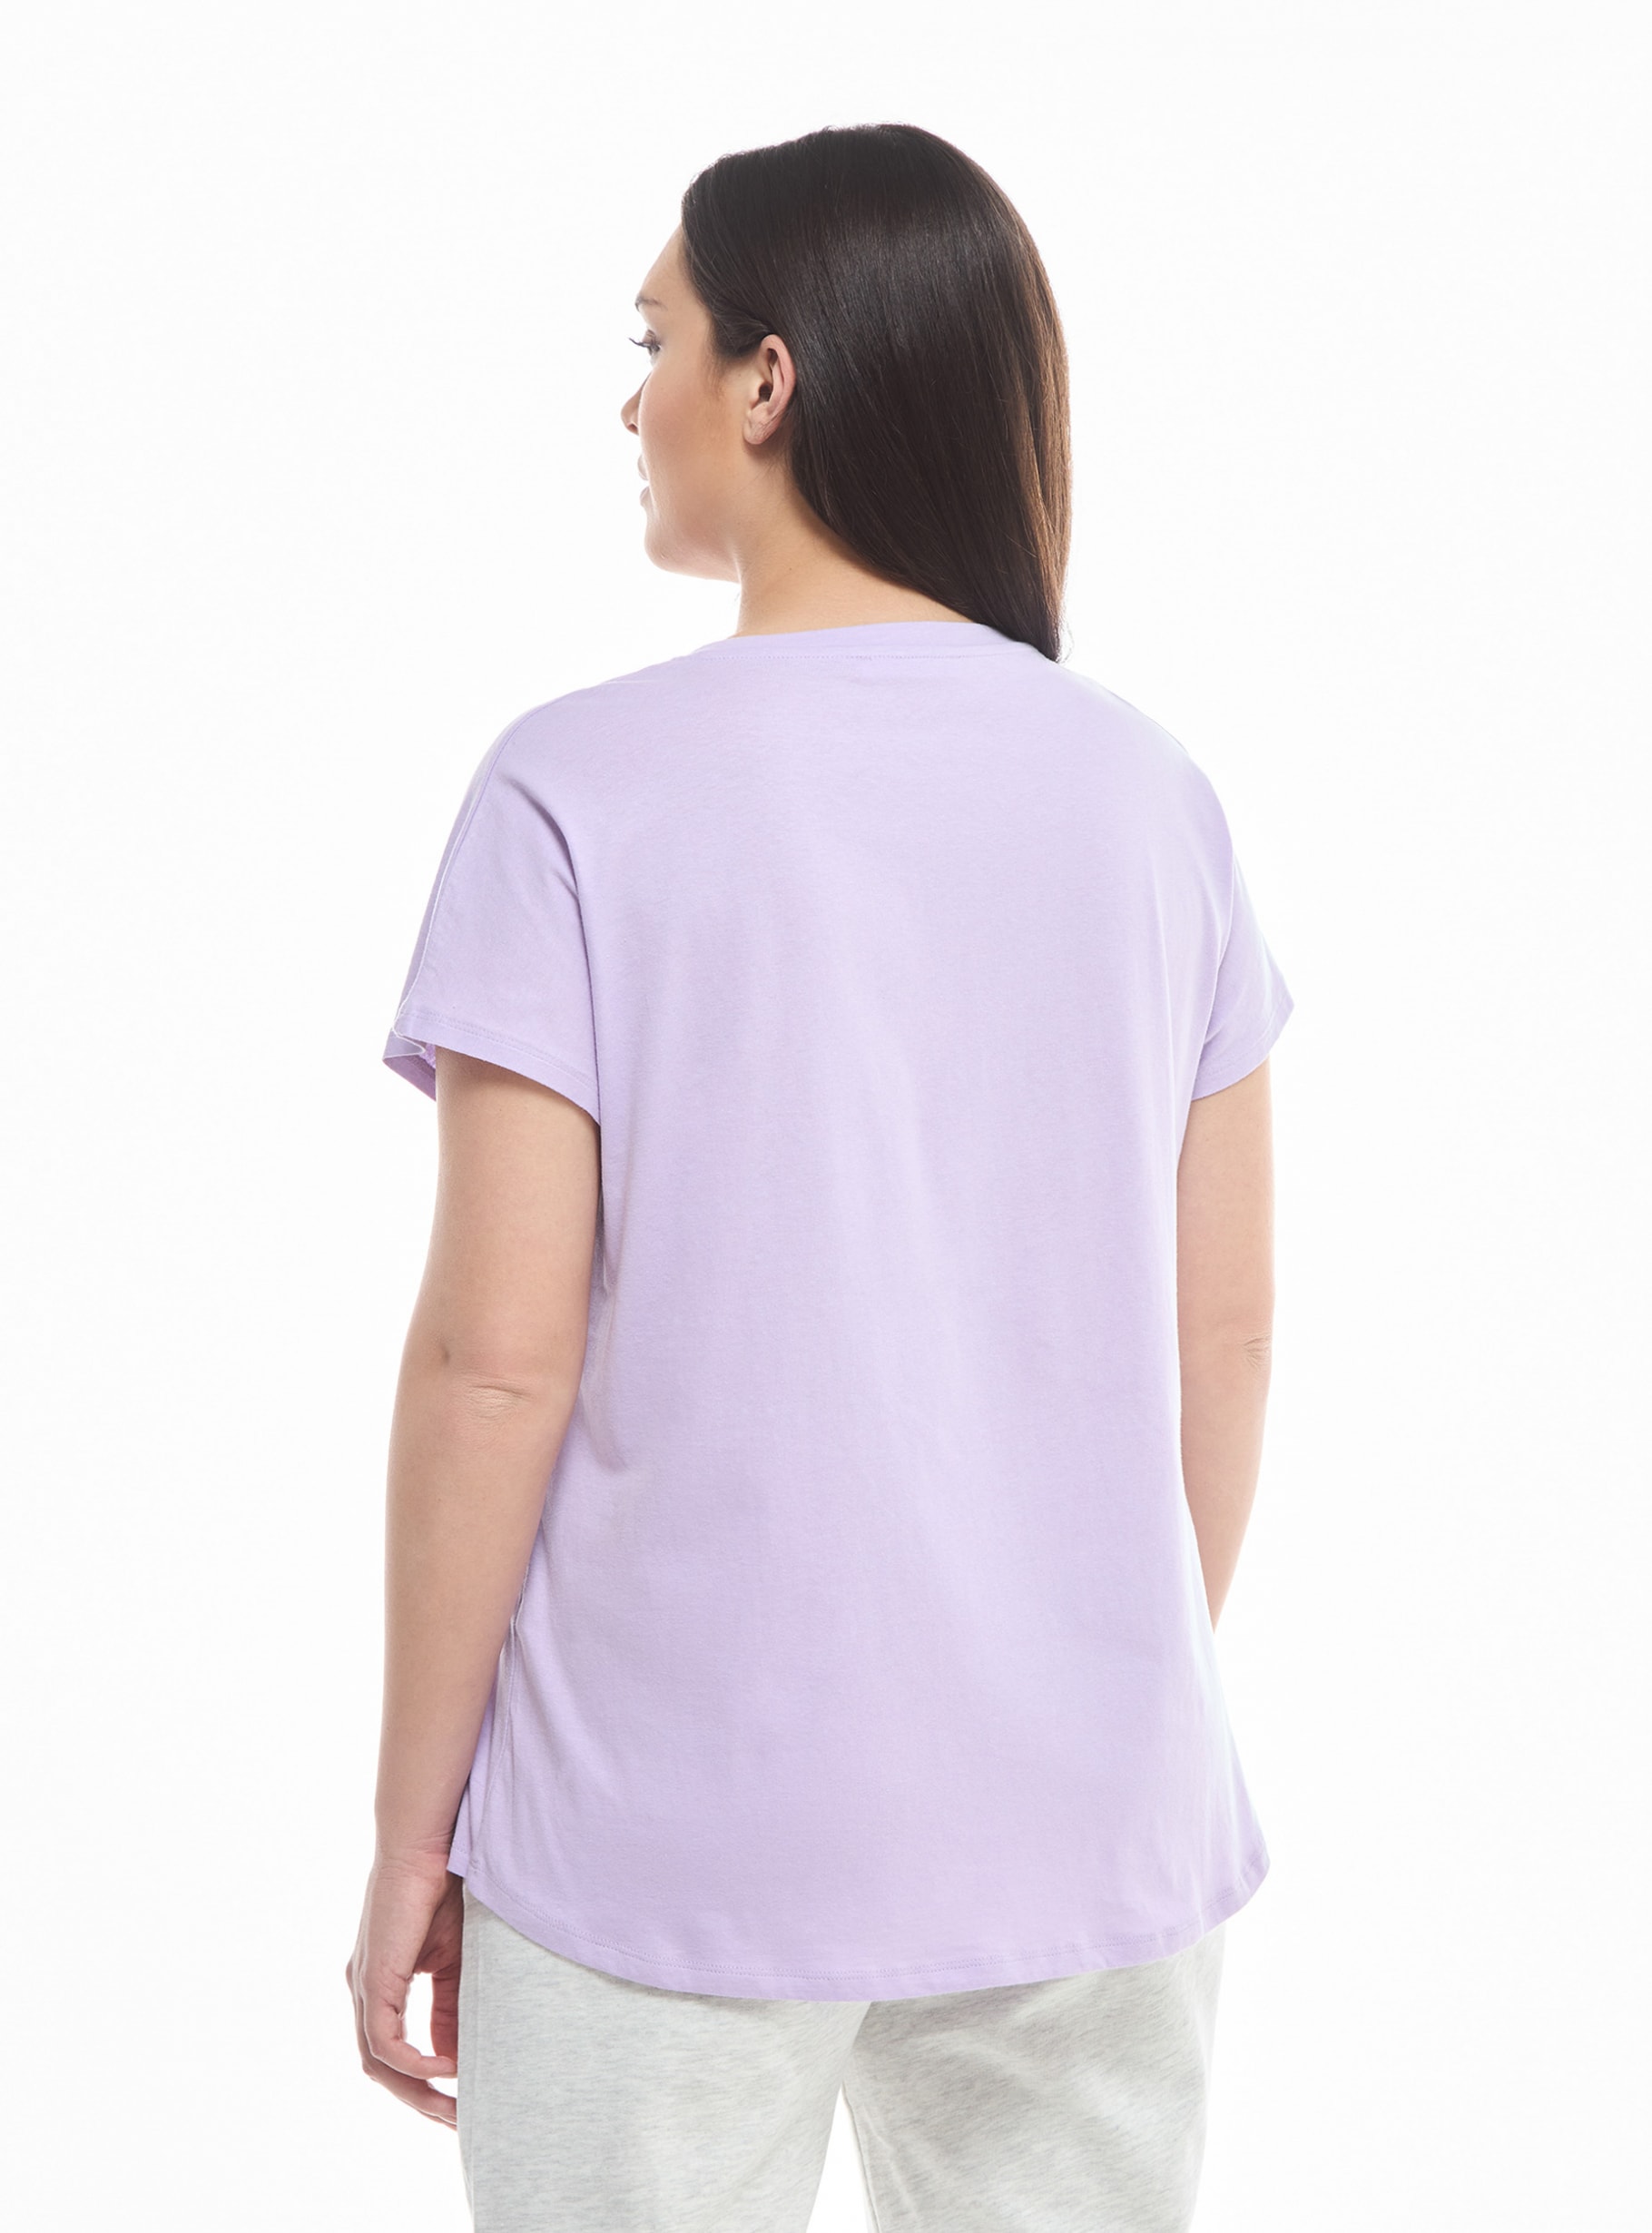 Loose fit trendy colors tshirts for girls - SaumyasStore